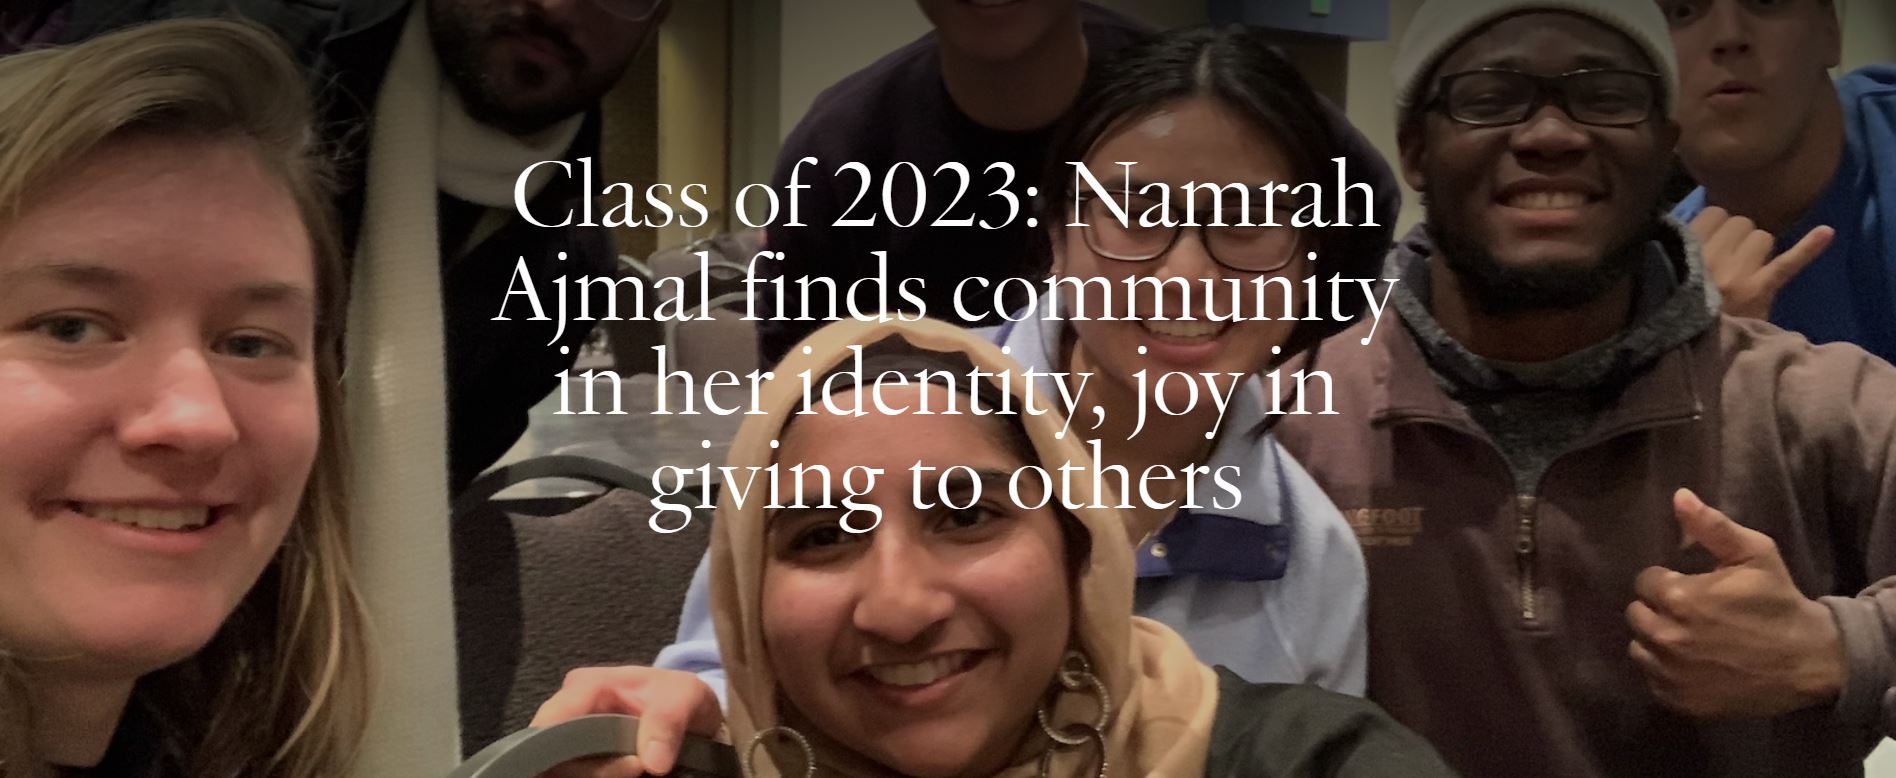 Namrah Ajmal finds community in her identity, joy helping others